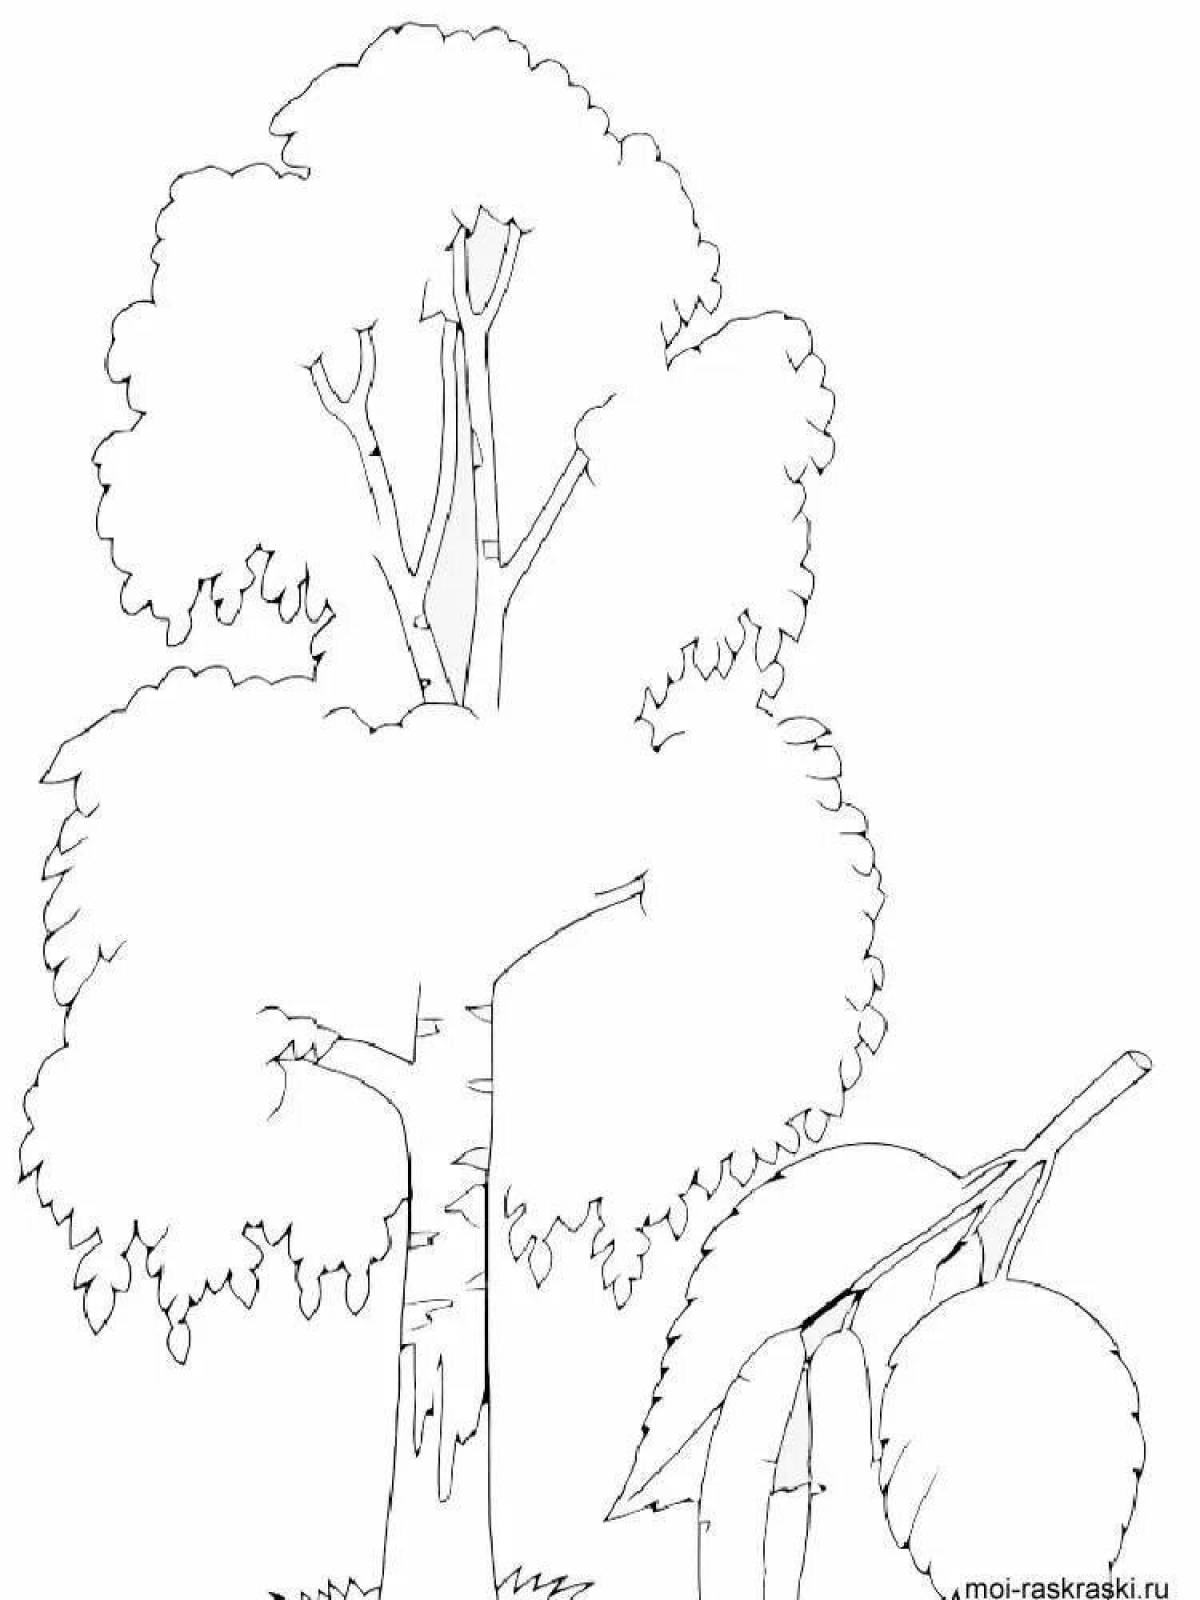 Luminous birch coloring page